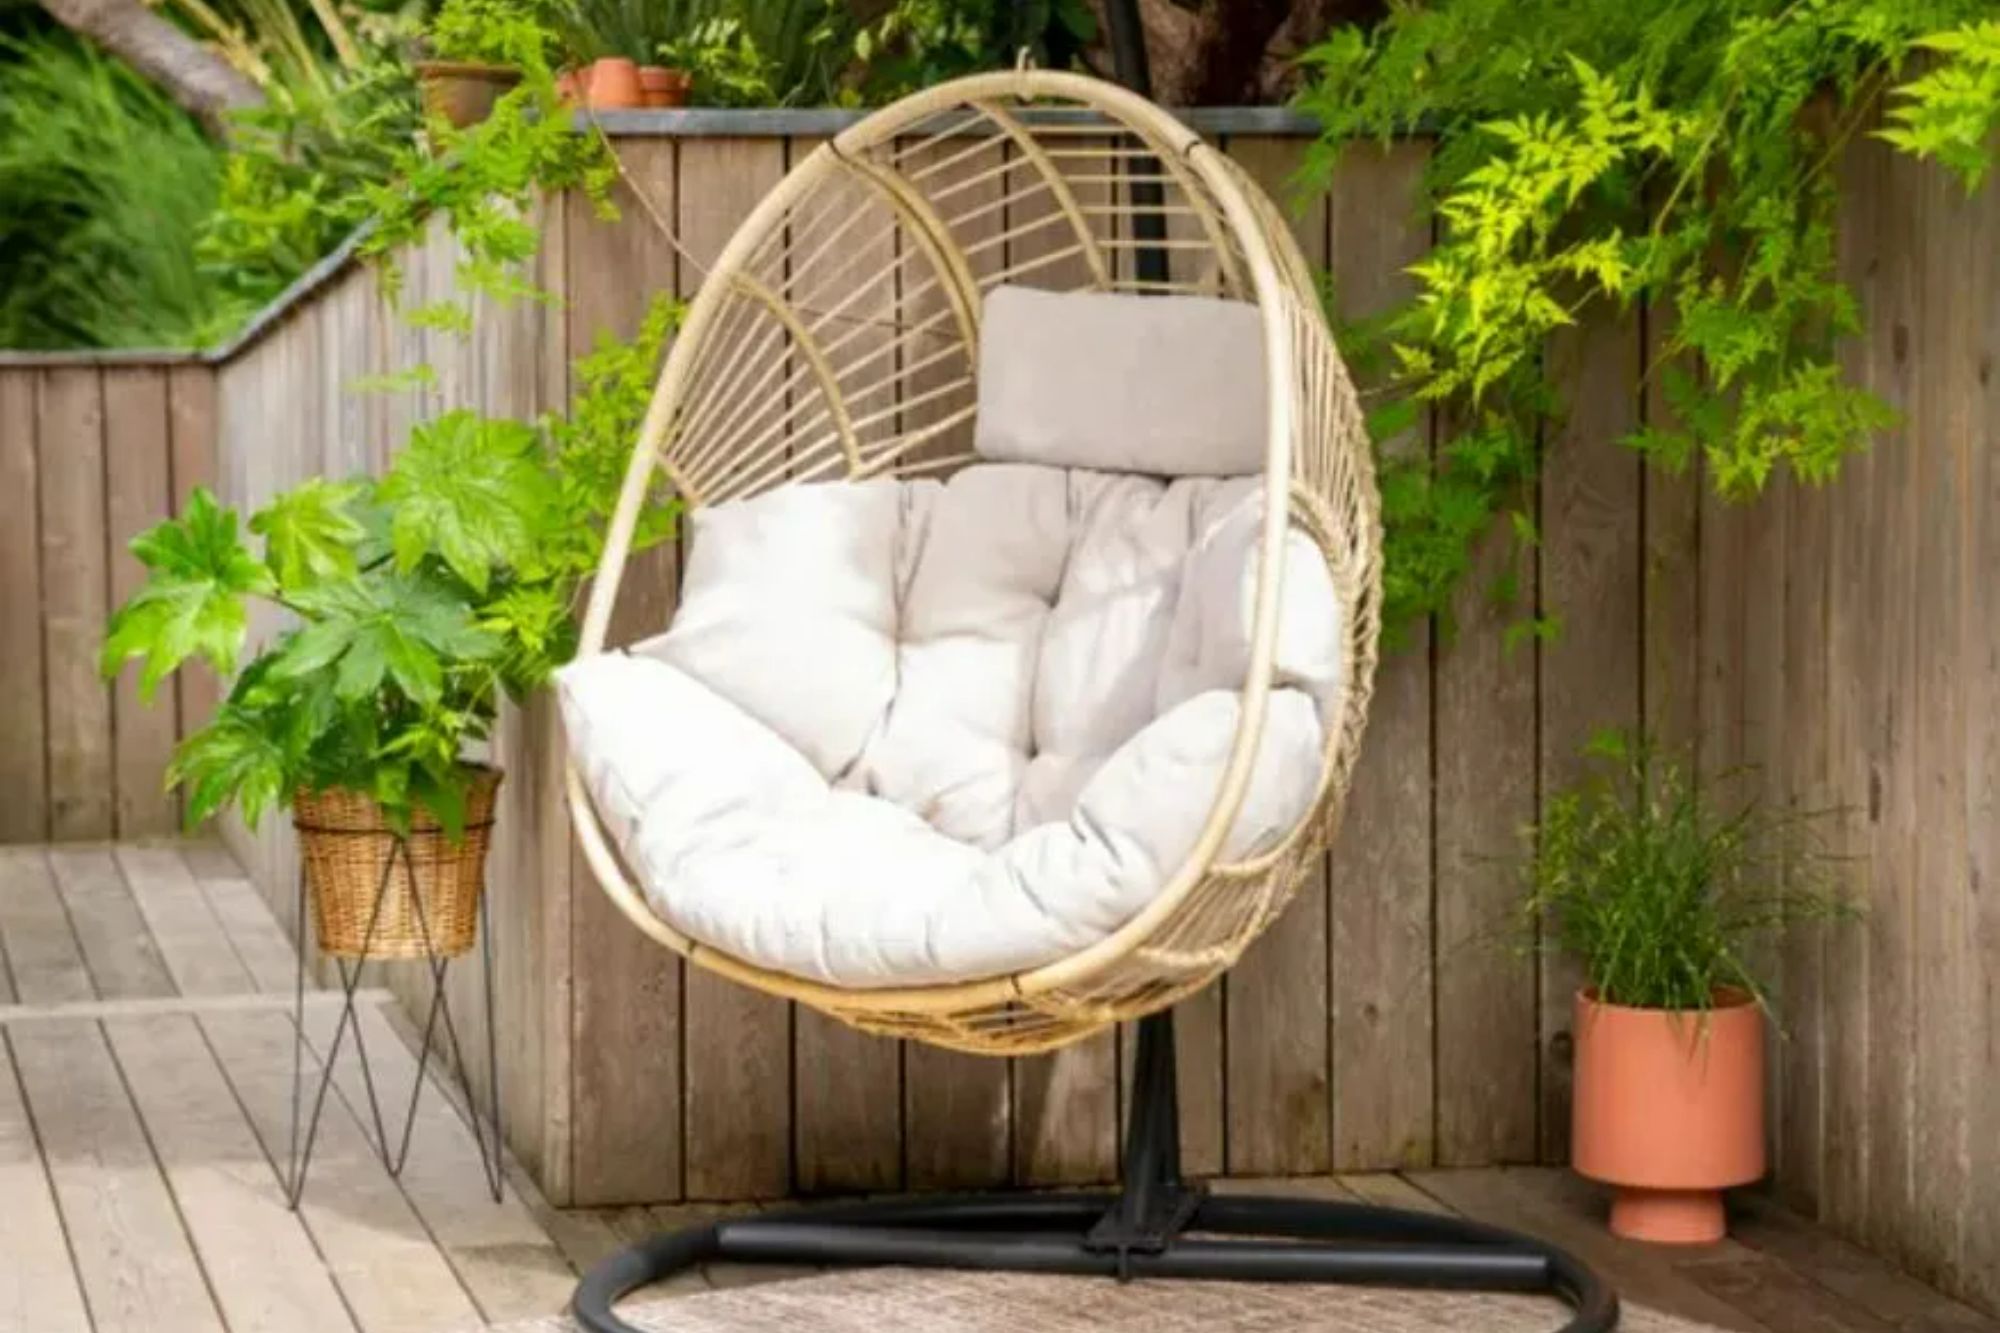 The Dunelm Singapore hanging egg chair is popular among shoppers